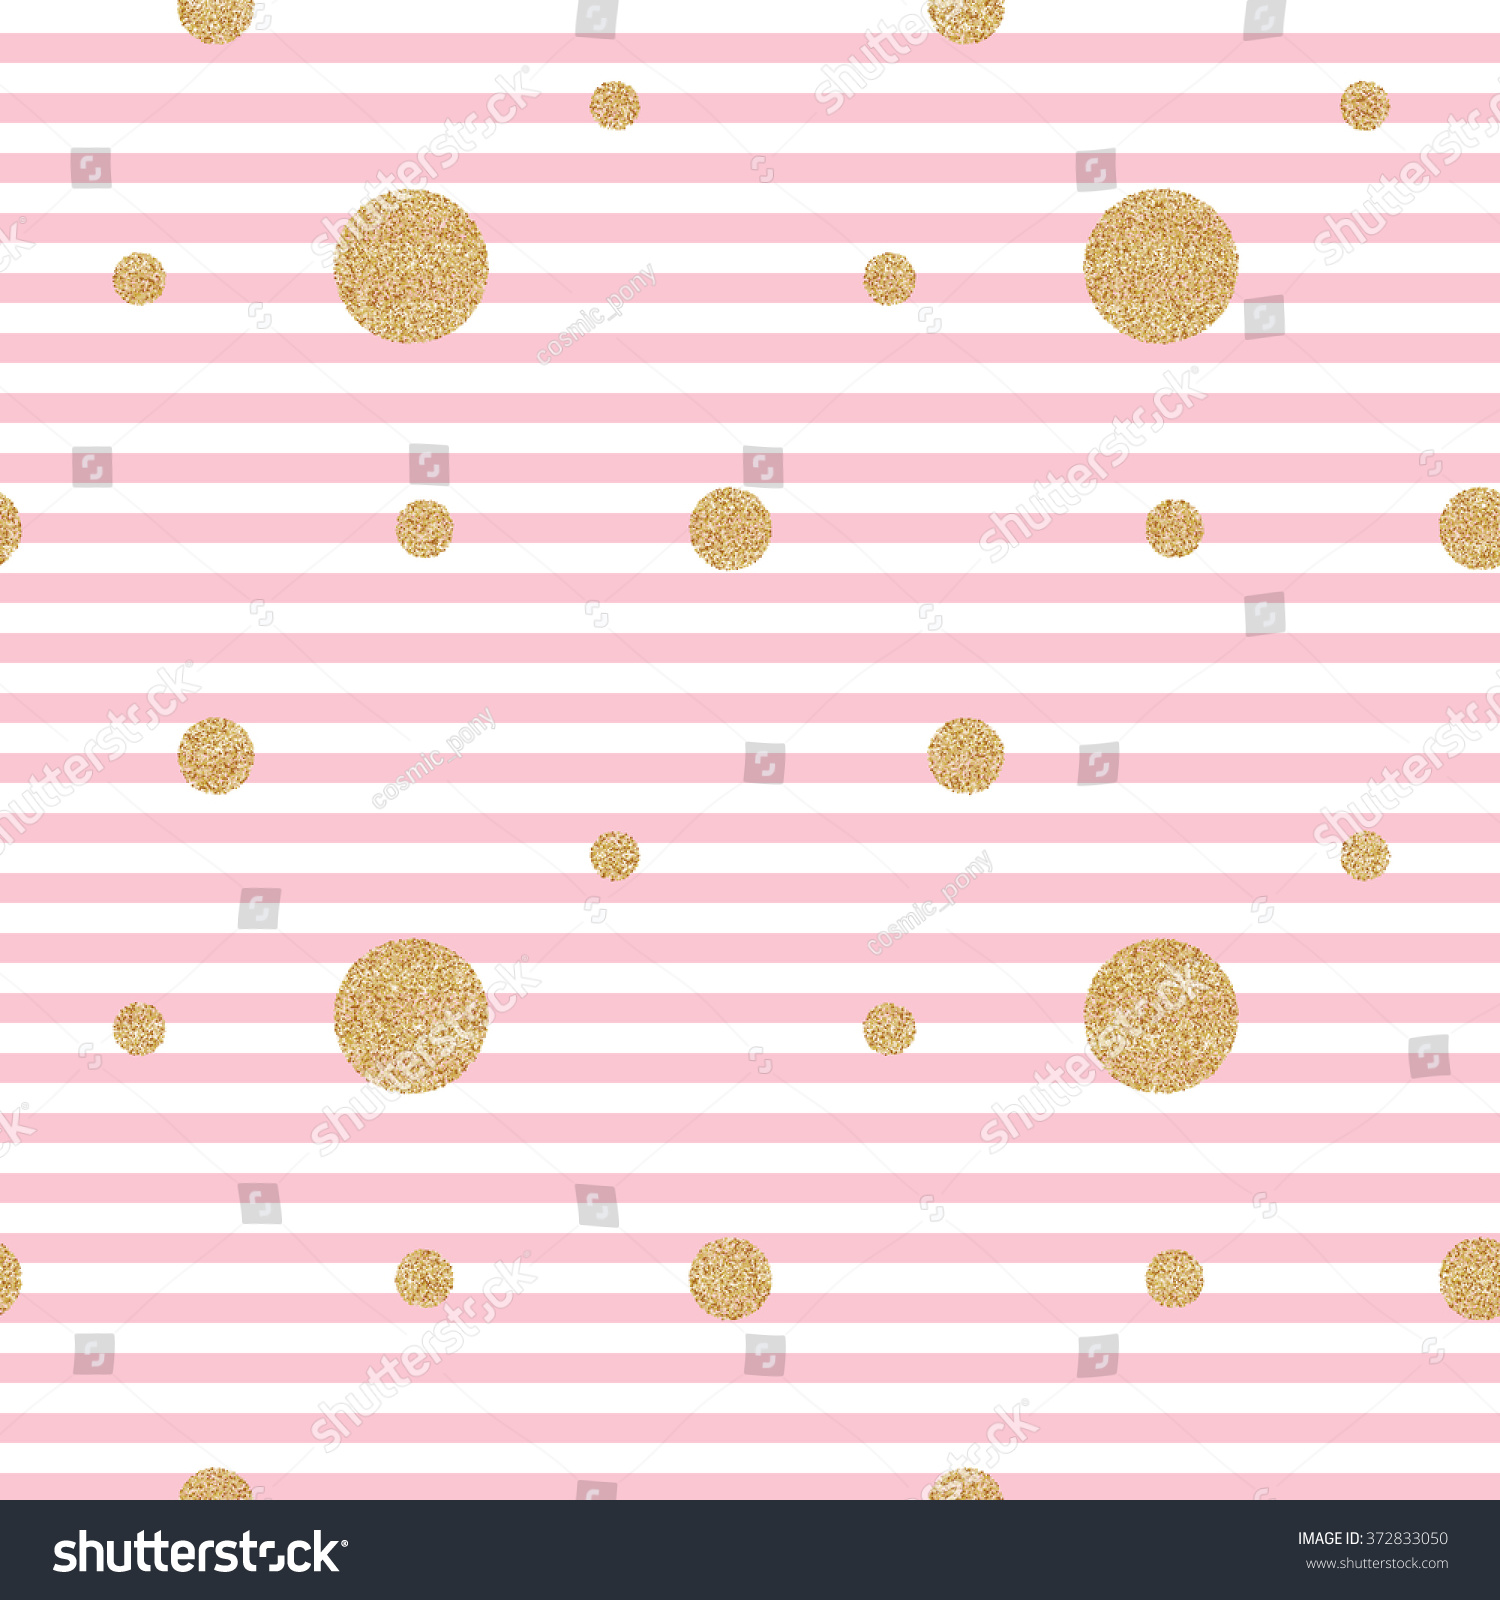 Pink Stripes And Golden Dots Seamless Pattern Background. Stock Vector ...